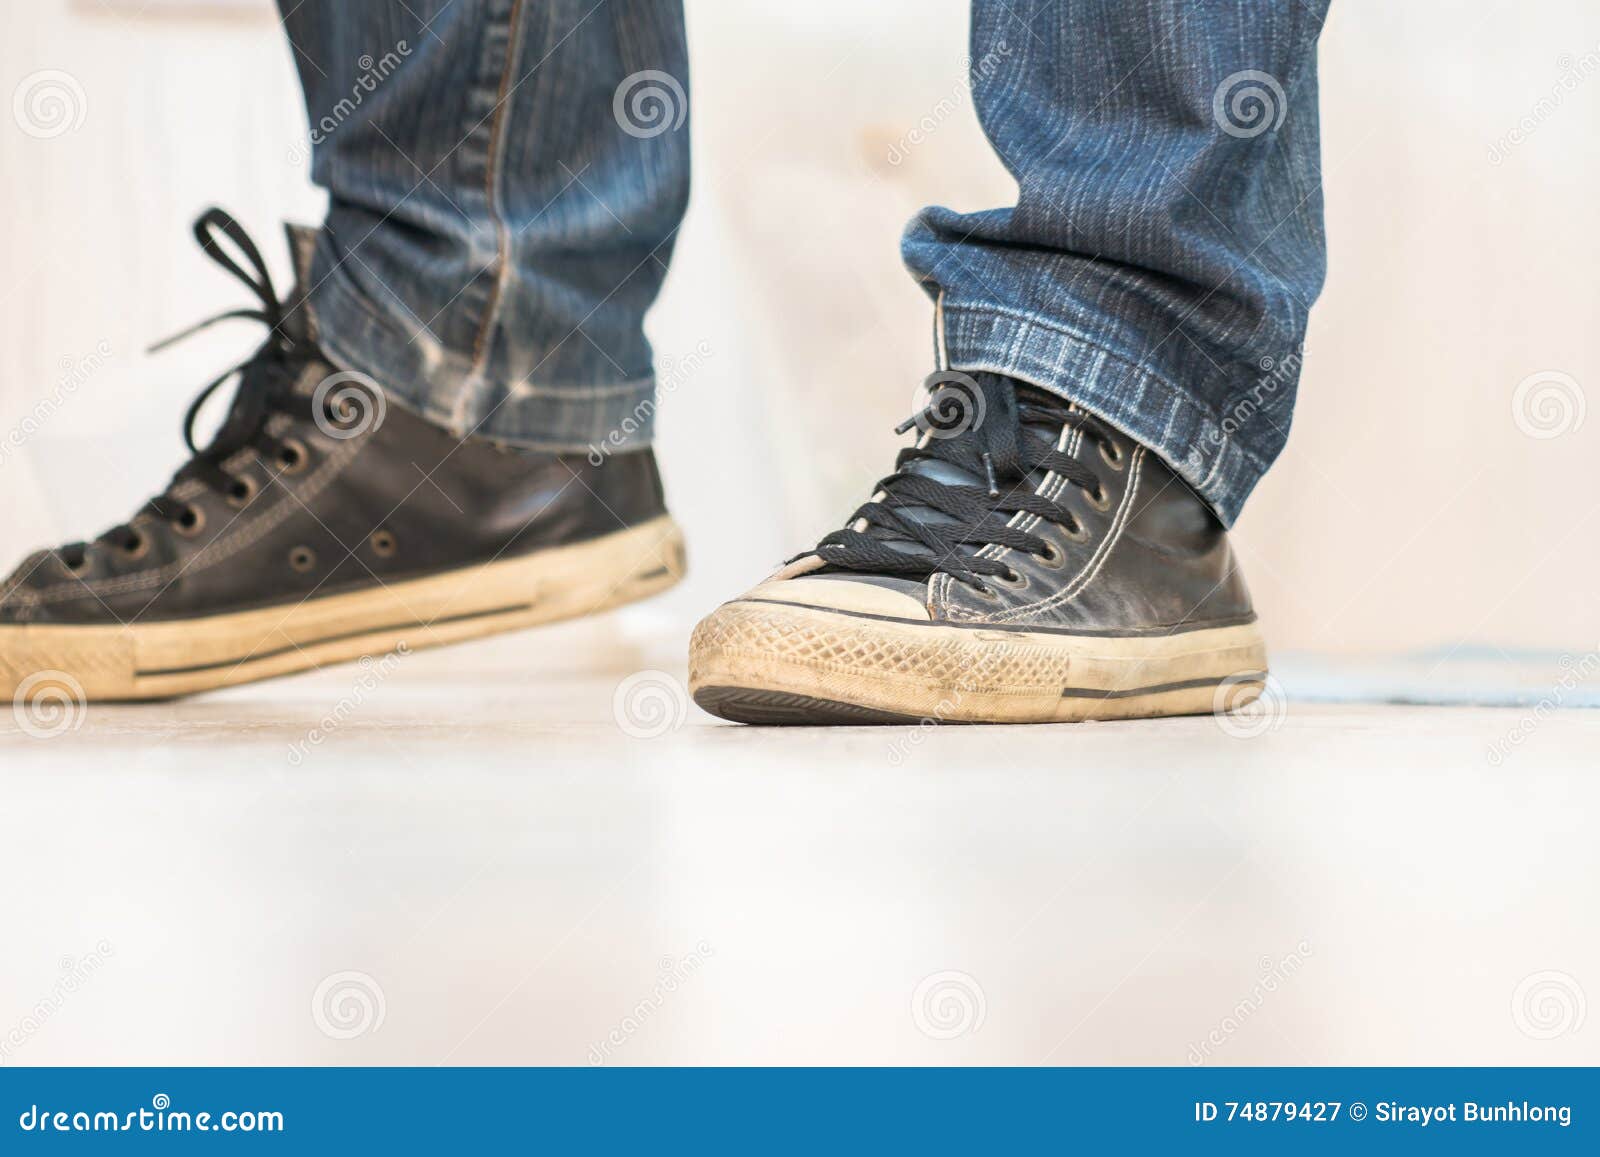 A Pair of Vintage Looking, Athletic Shoes and Skinny Jeans Stock Image ...